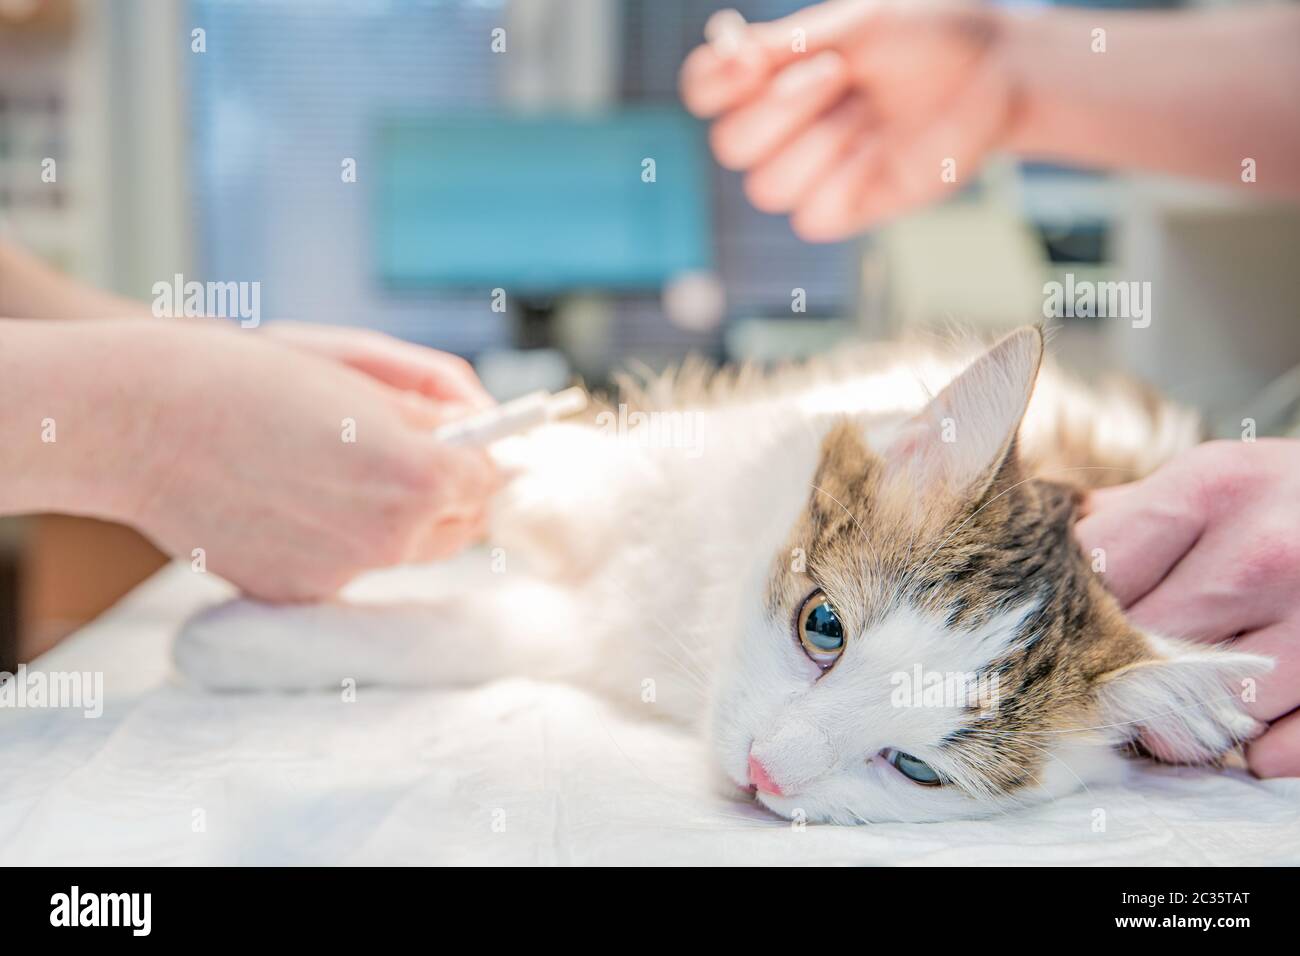 performing an injection to a cat at a vet clinic. Stock Photo